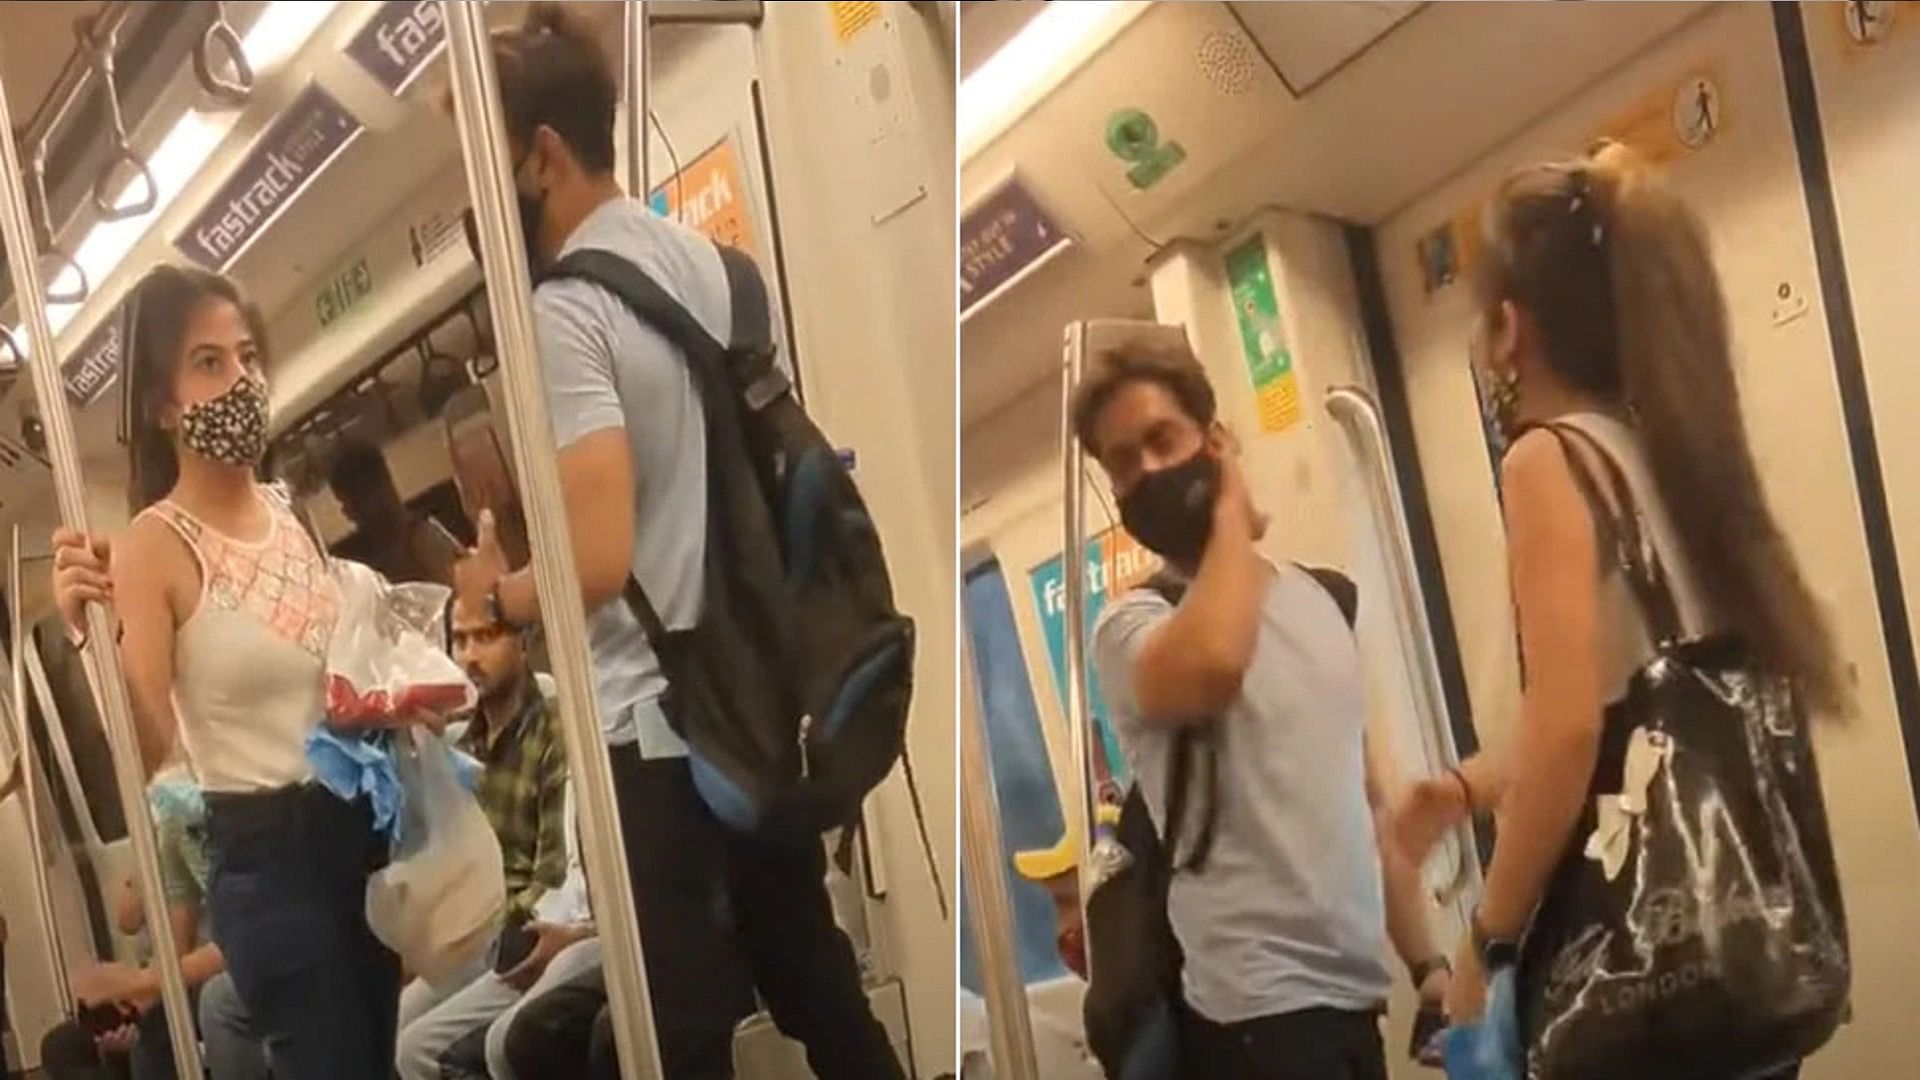 Trending Video: The girl slapped the boy in the metro high voltage drama went viral